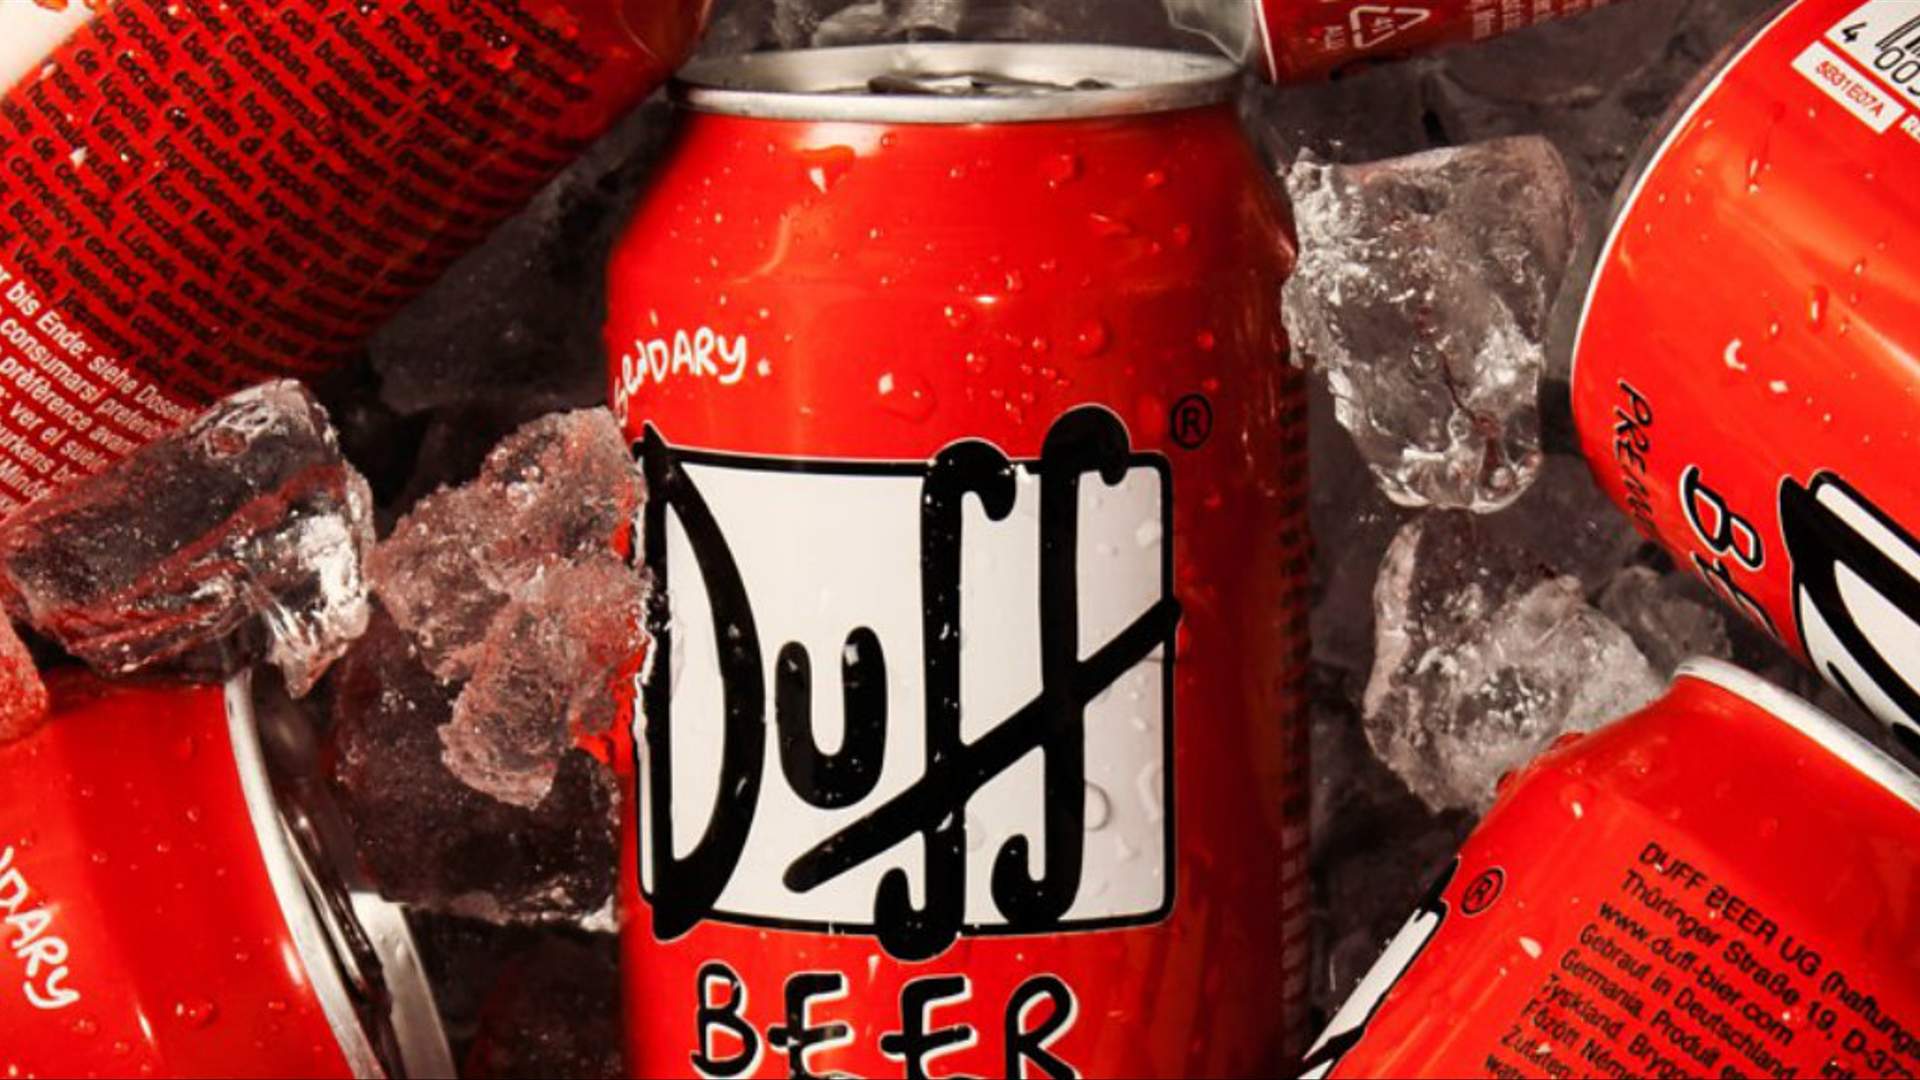 The Simpsons Universal Studios Parks Duffman Duff Beer Can